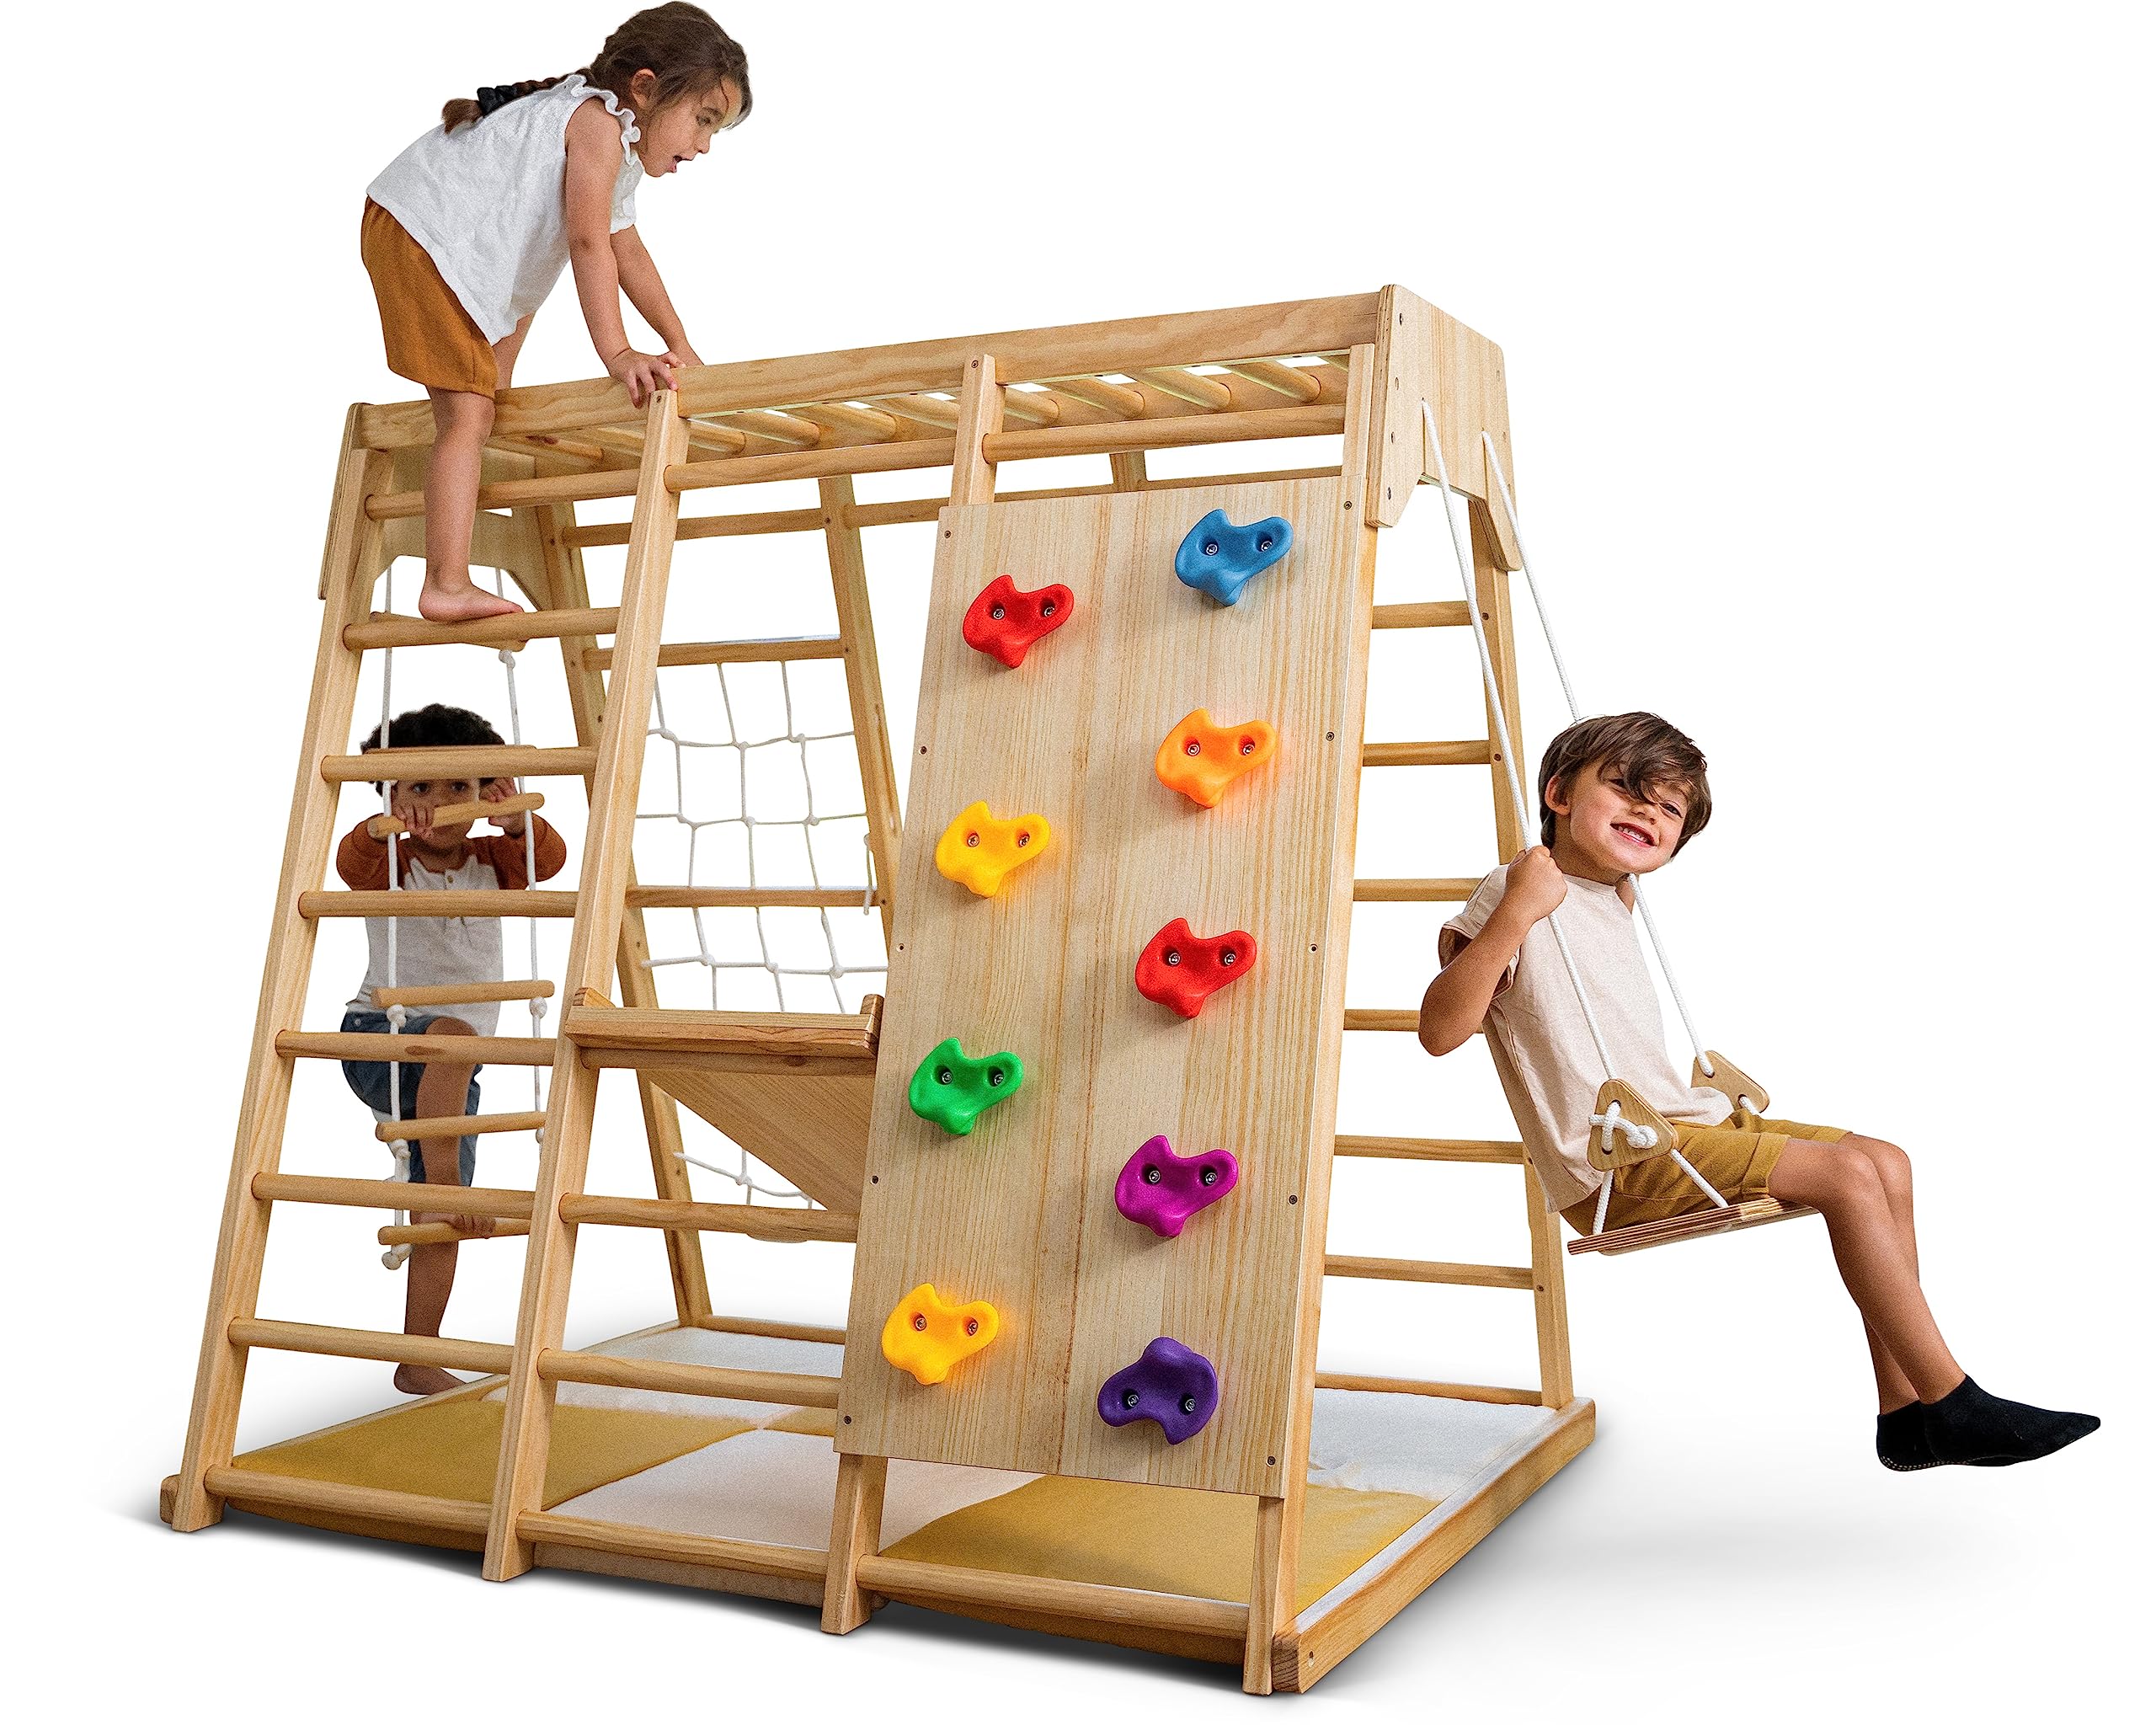 Avenlur Magnolia Indoor Playground 7-in-1 Jungle Gym Montessori Waldorf Style Wooden Climber Playset Slide, Rock Climbing Wall, Rope Wall Climber, Monkey Bars, Swing for Toddlers, Children Kids 2-6yrs